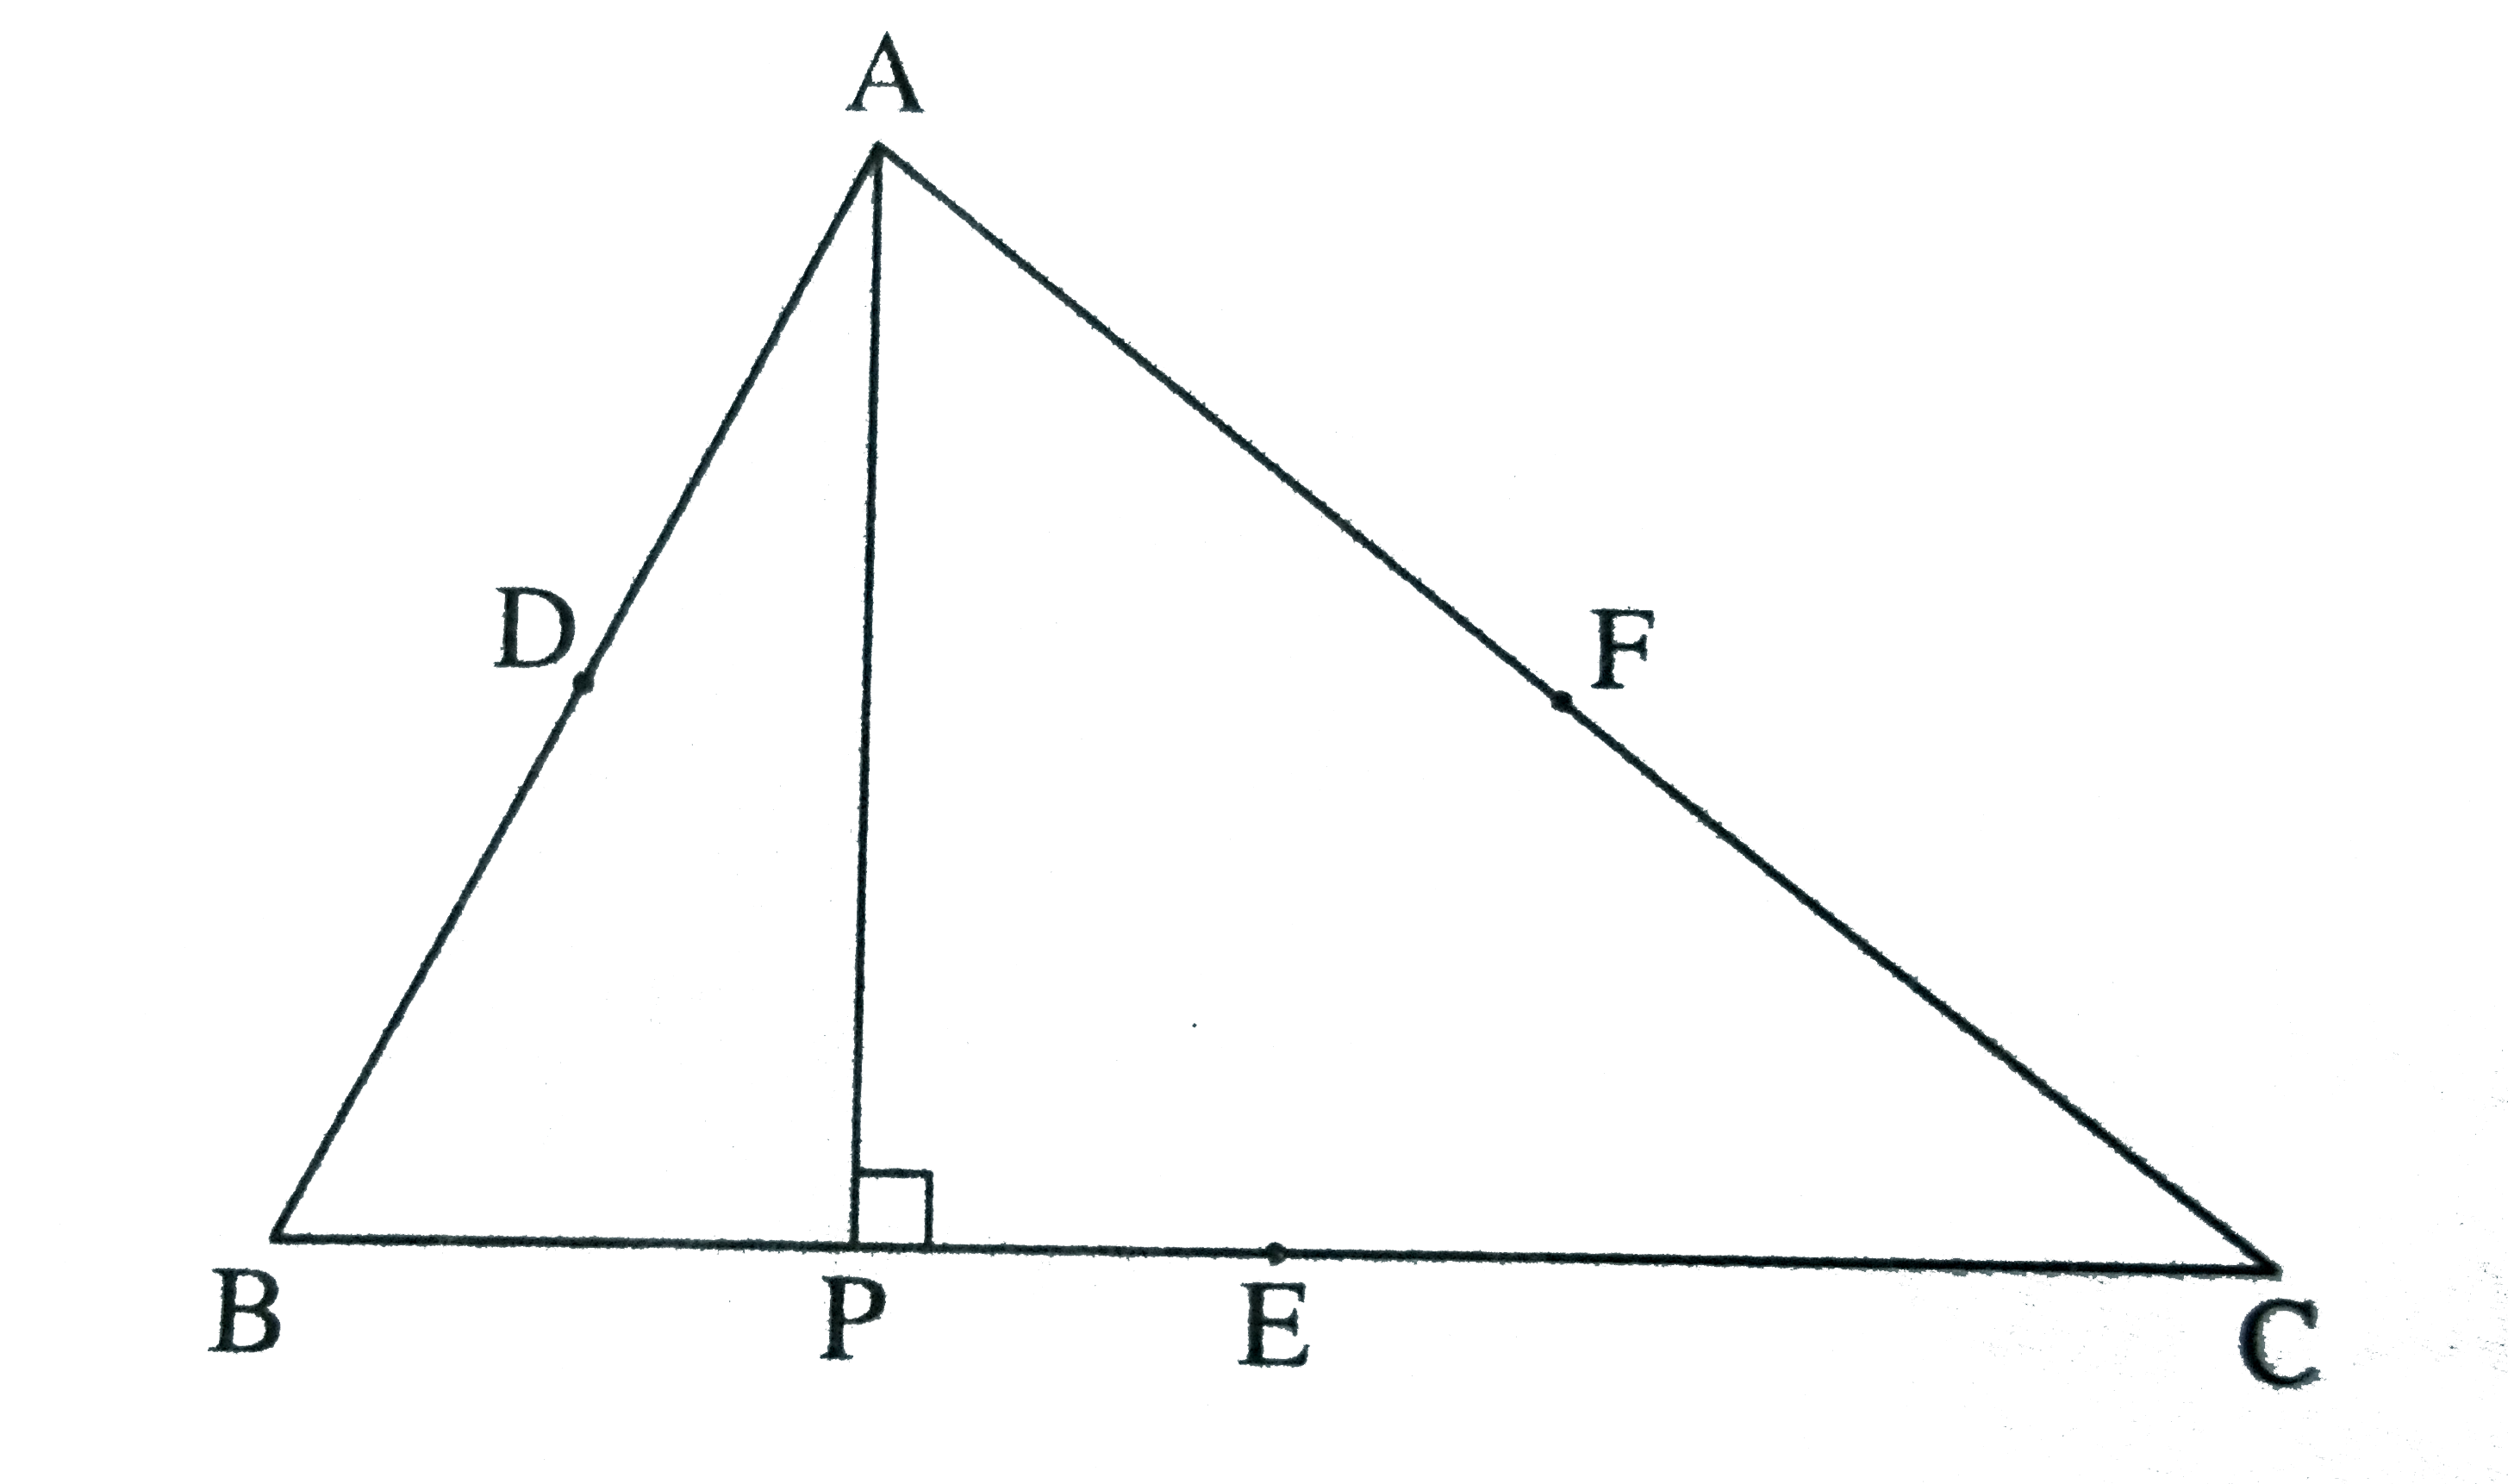 In the figure, D E and F are midpoints of sedes AB,BC and AC respectively. P is the foot of the perpendicular from A to side BC. Show that points D, E,F and P are concyclic.